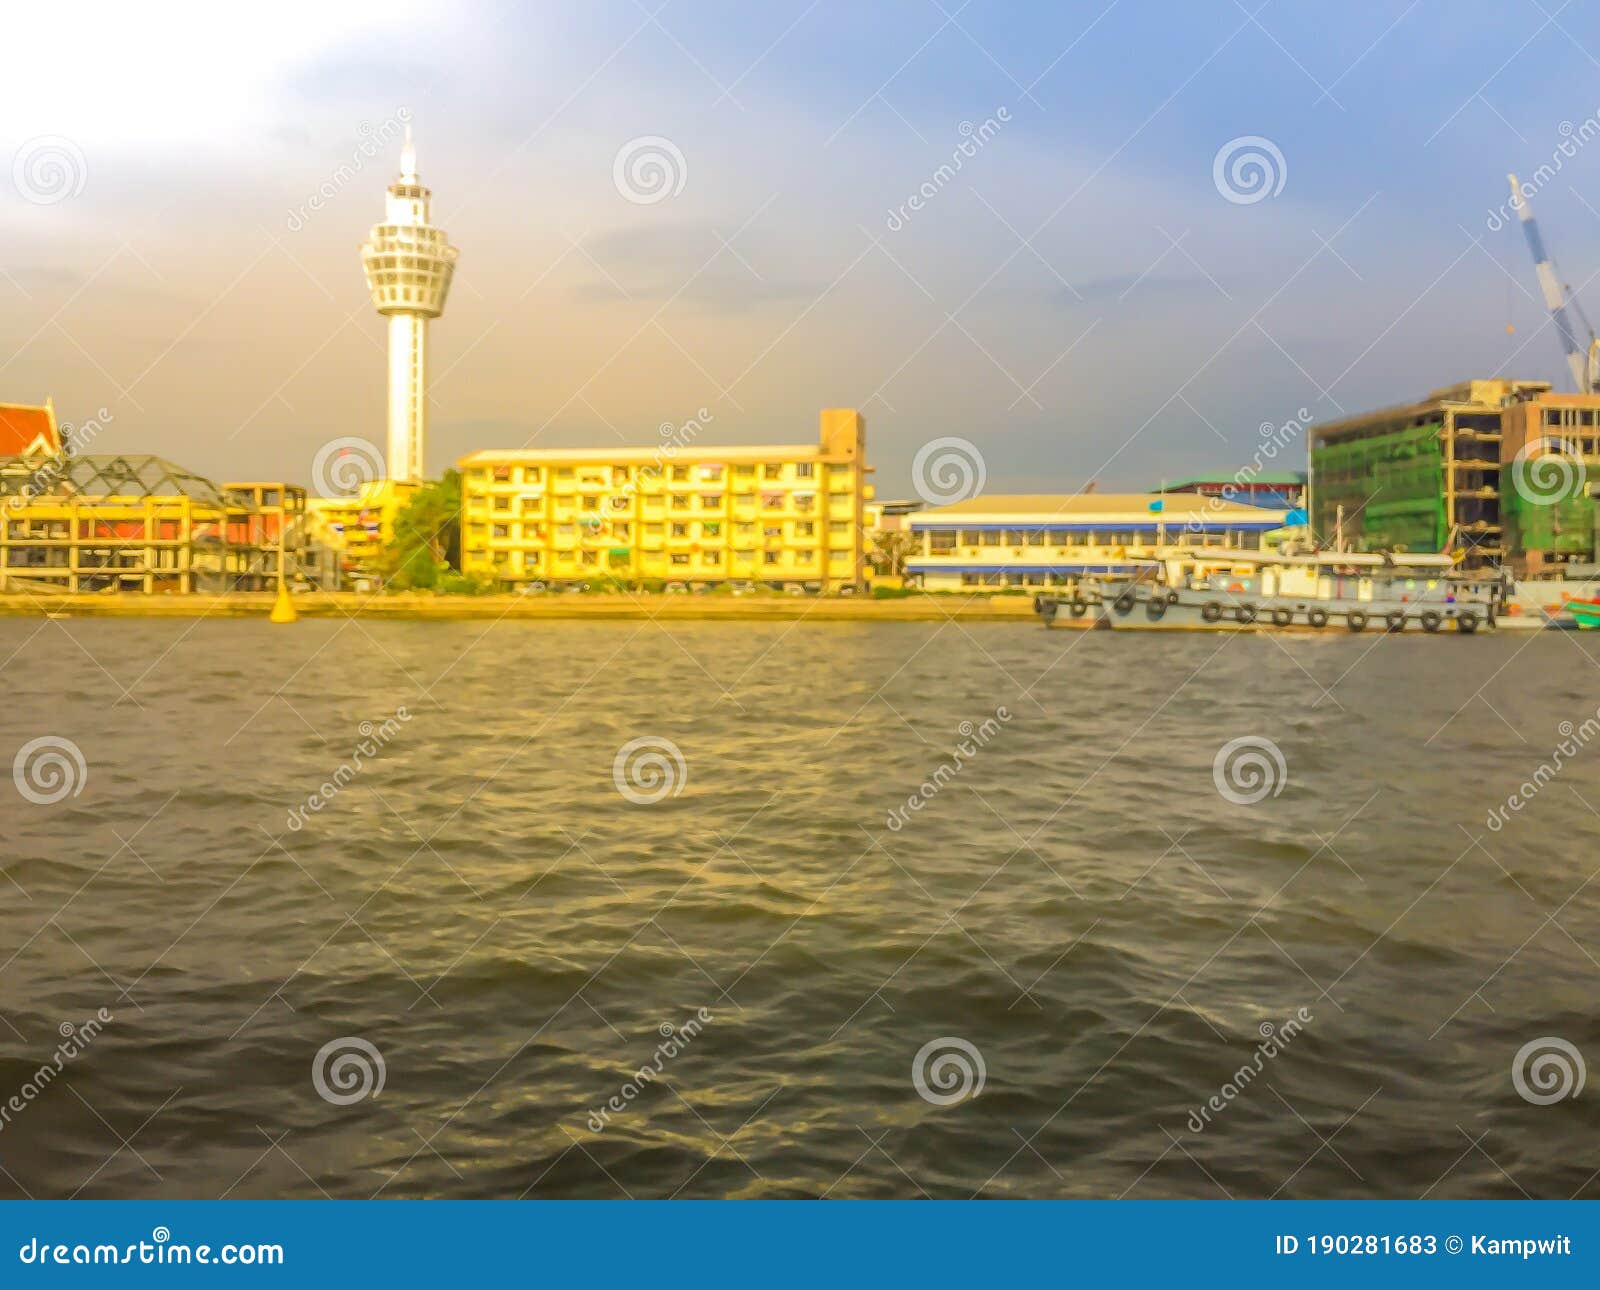 Riverfront View Of Samut Prakan City Hall With New Observation Tower And Boat Pier Samut Prakan Is At The Mouth Of The Chao Stock Image Image Of Building Boat